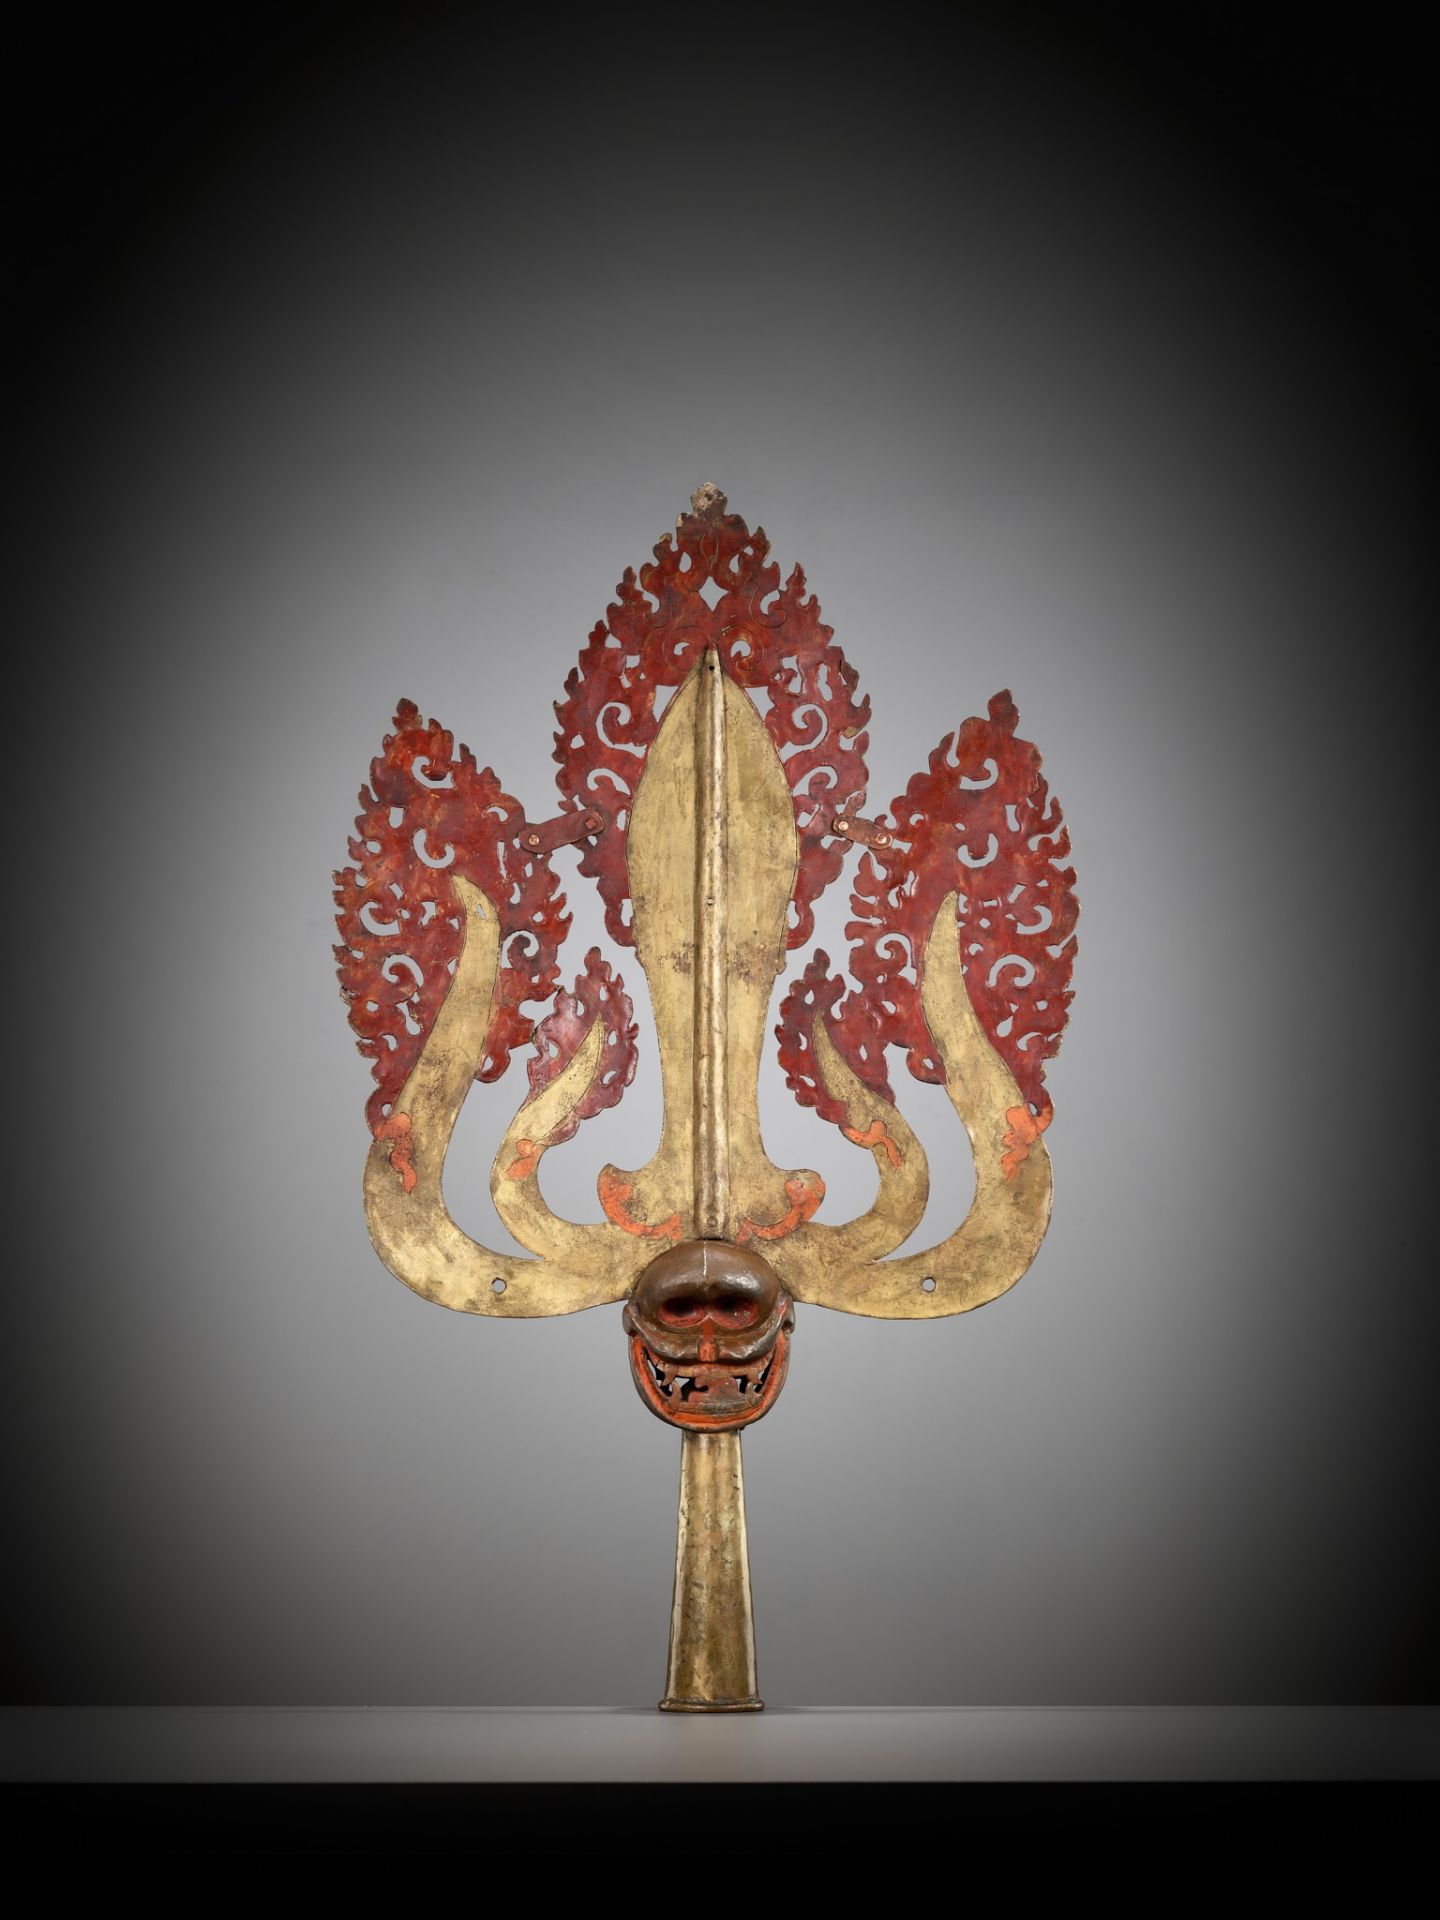 A LARGE LACQUERED AND GILT COPPER-ALLOY TRISHULA FITTING, TIBET, 17TH - 18TH CENTURY - Image 7 of 12